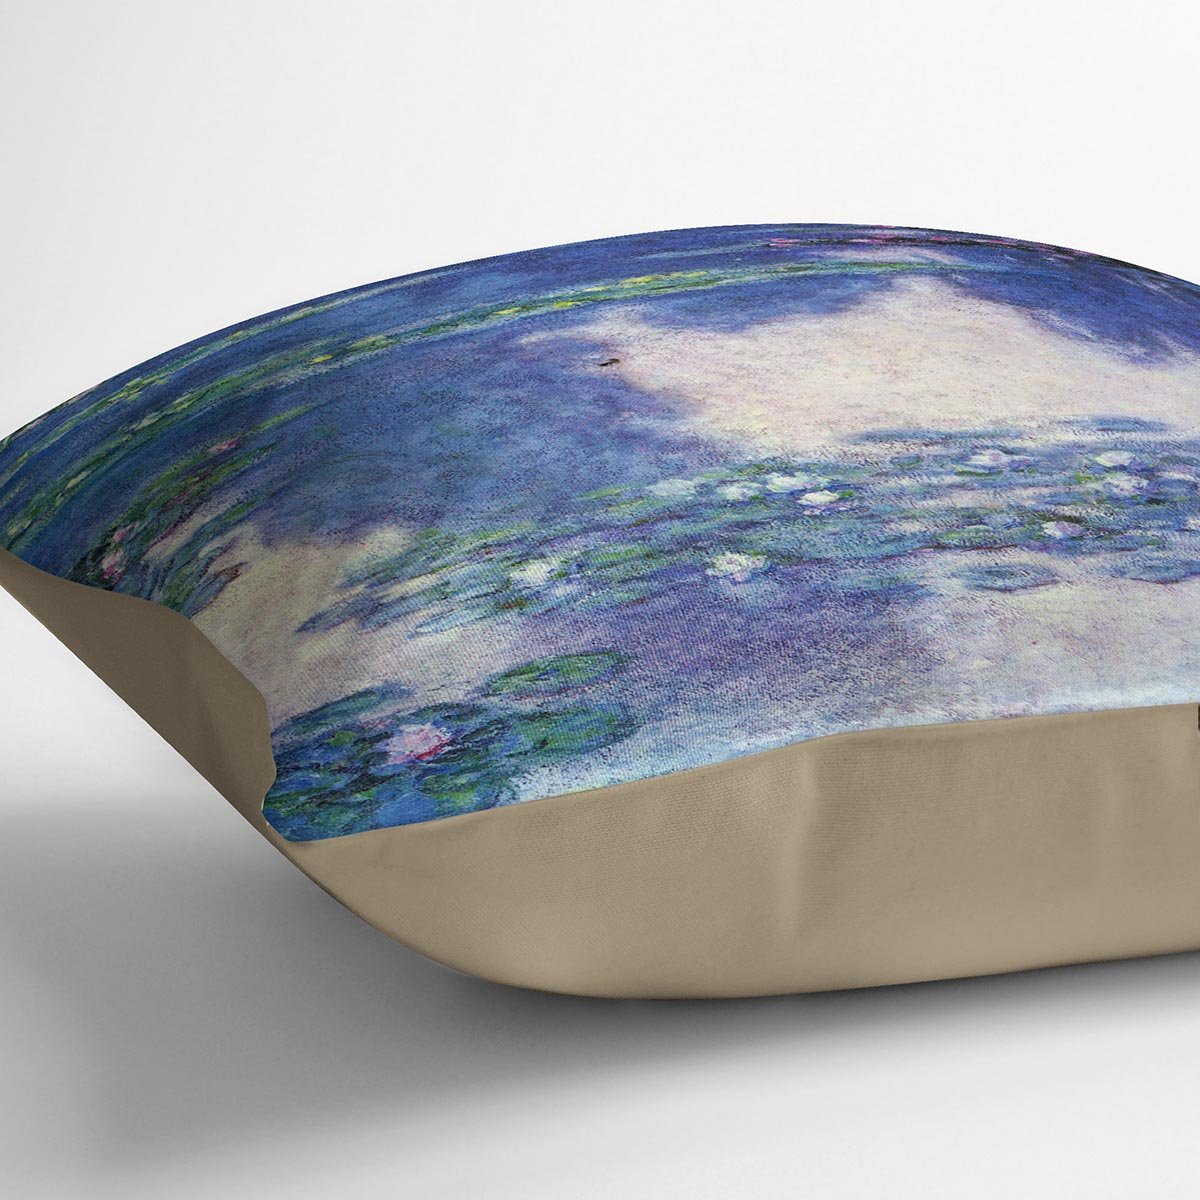 Water lilies water landscape 4 by Monet Throw Pillow